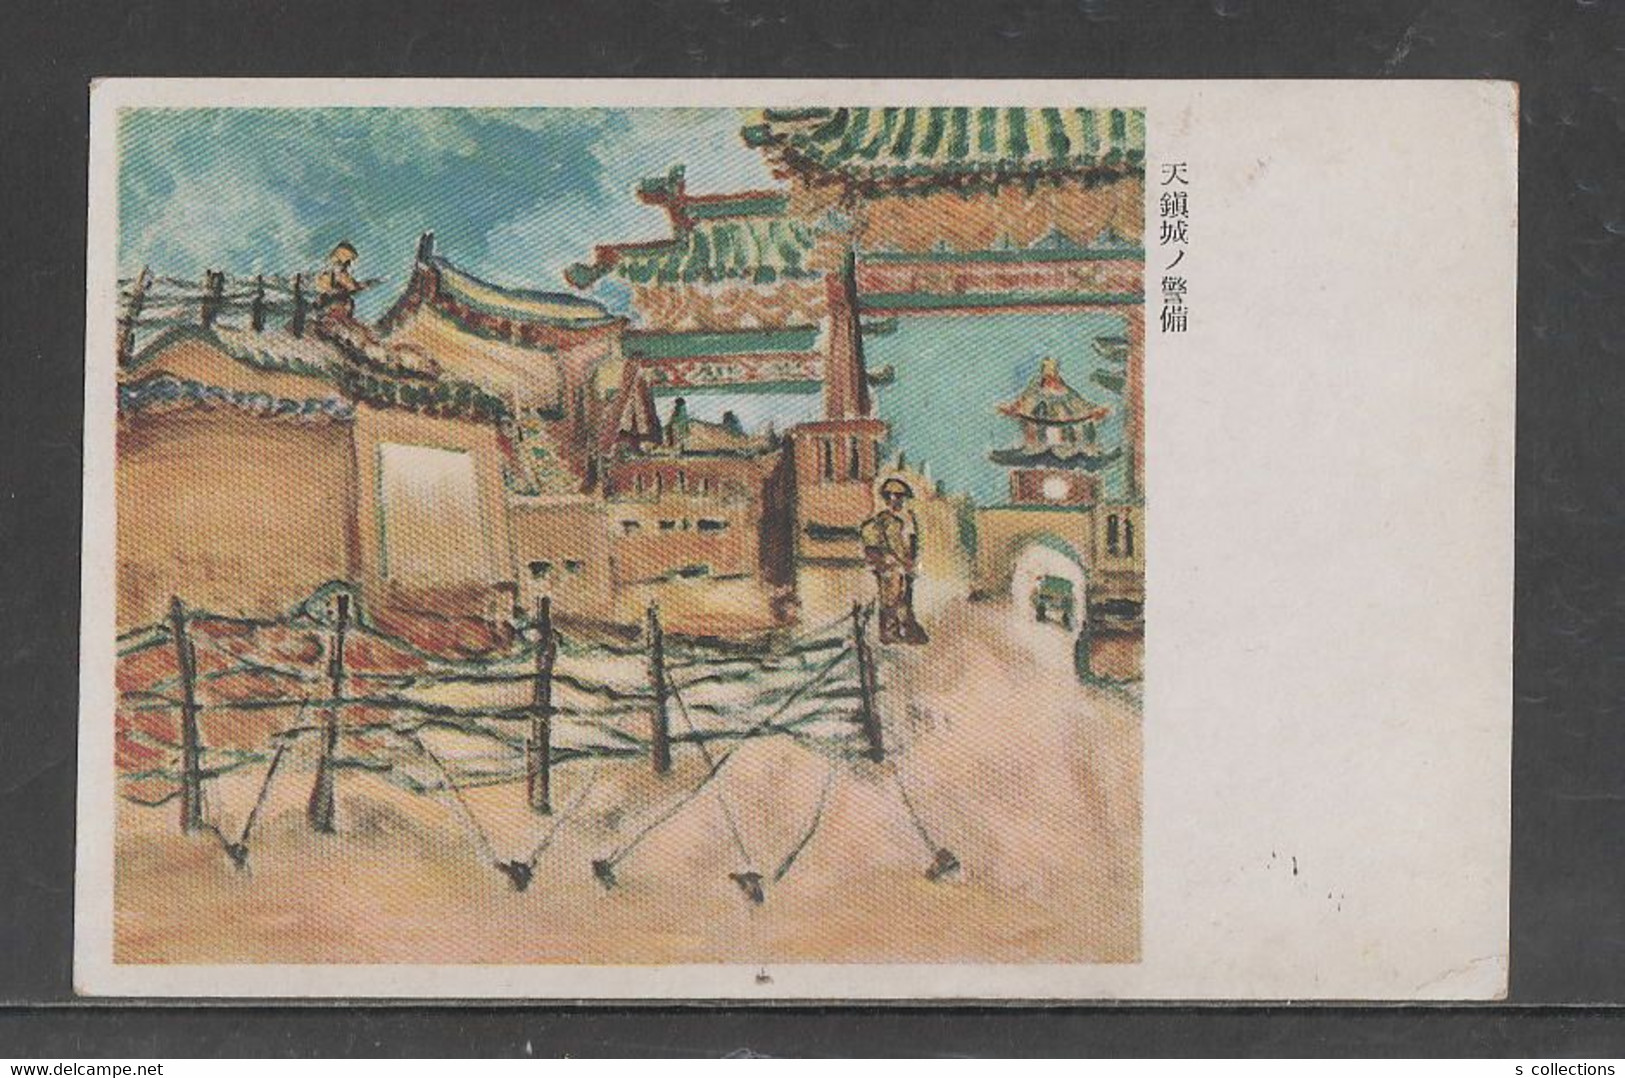 JAPAN WWII Military Tianzhen Castle Picture Postcard NORTH CHINA WW2 MANCHURIA CHINE MANDCHOUKOUO JAPON GIAPPONE - 1941-45 Northern China